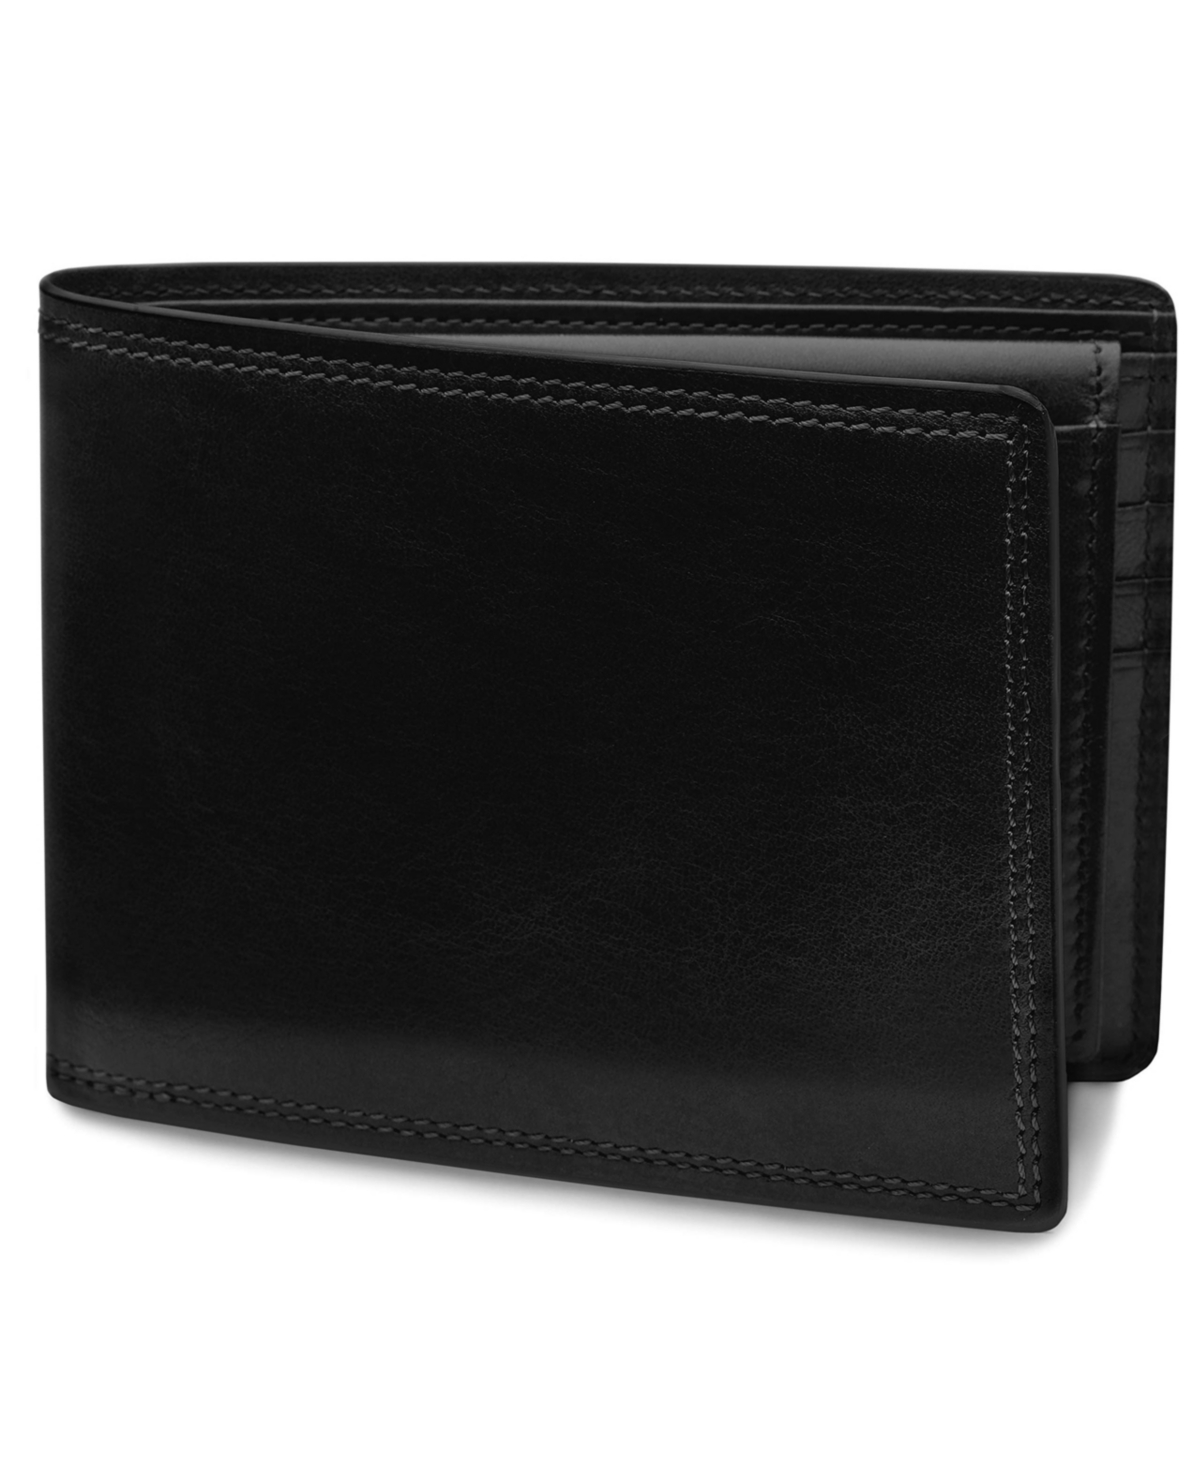 Men's Wallet, Dolce Leather Credit Wallet with I.d. Passcase - Black